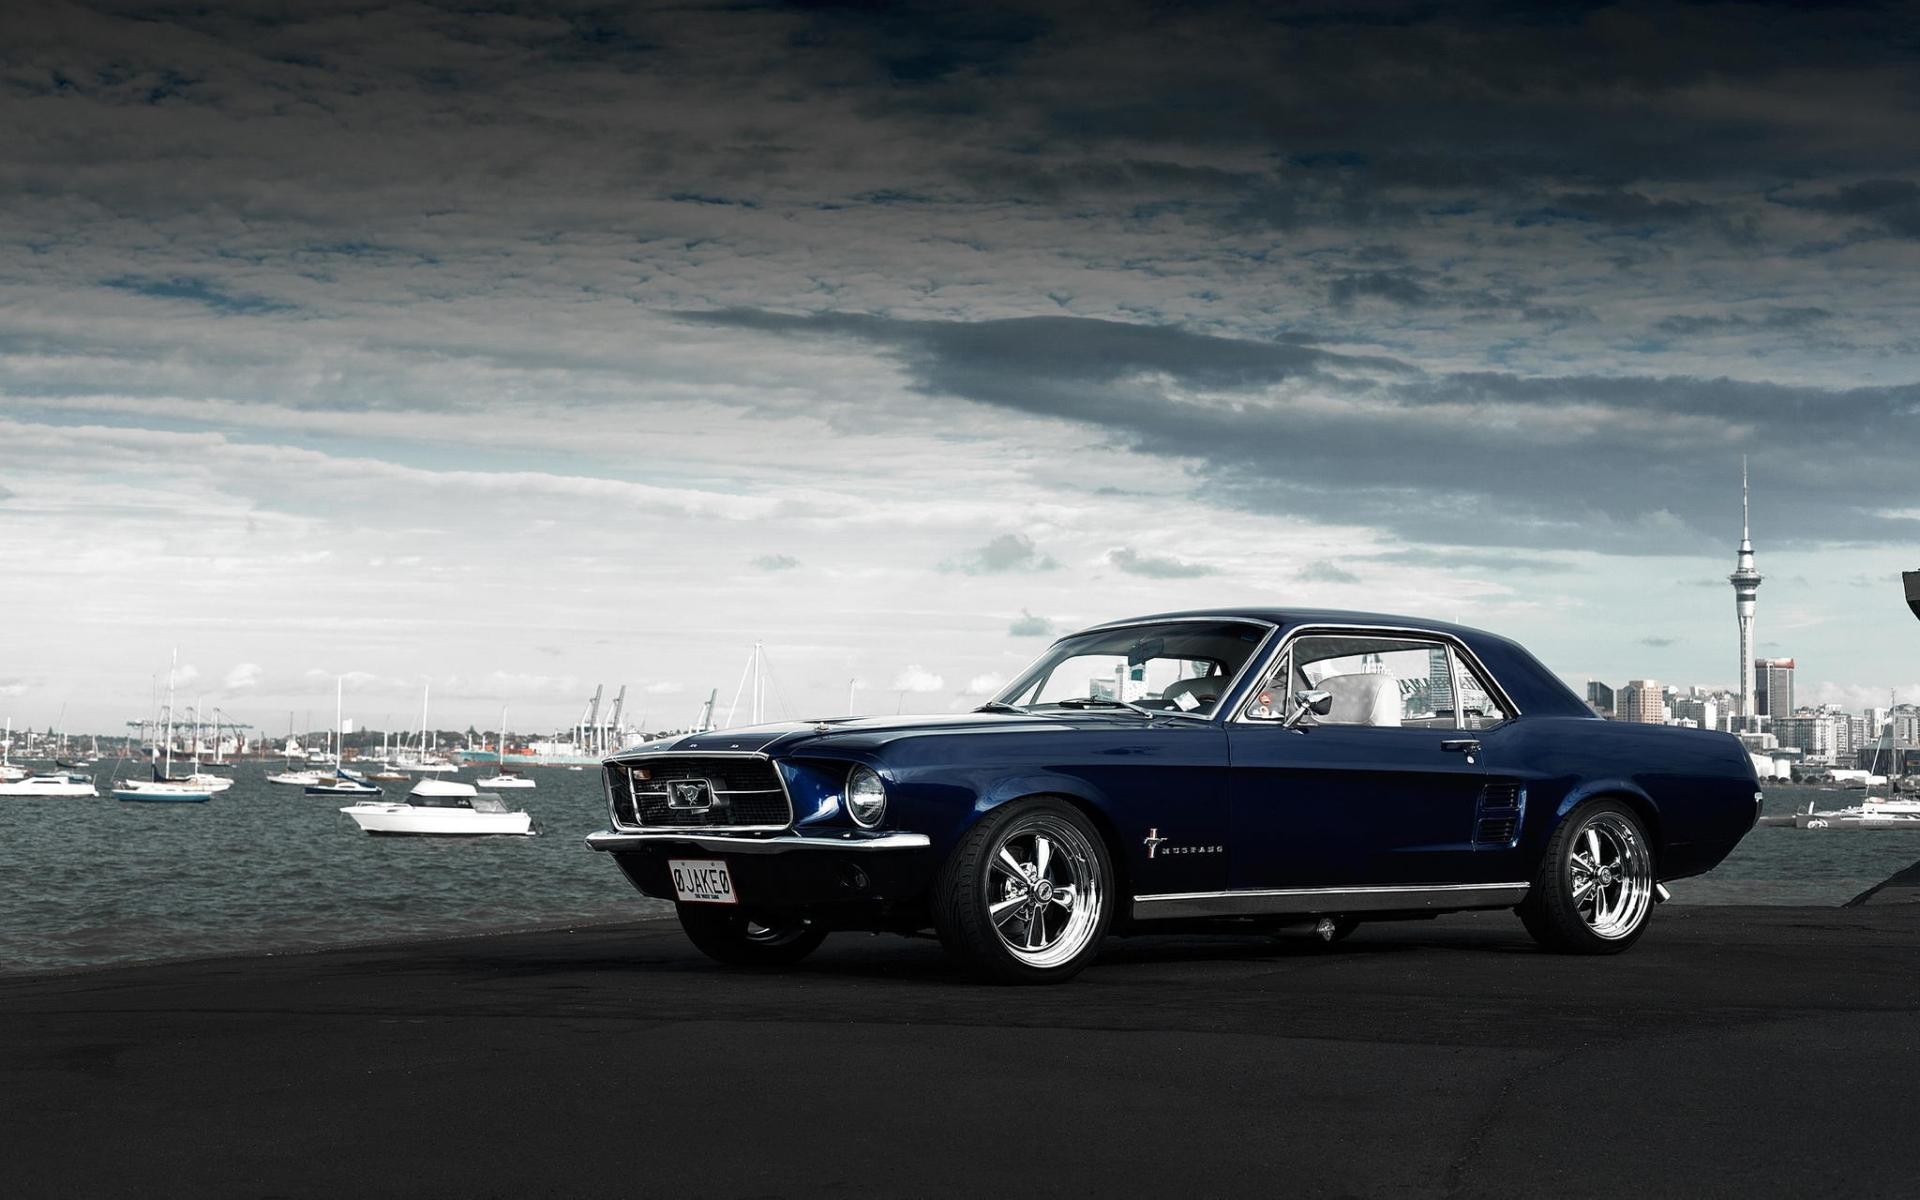 General 1920x1200 car Ford Ford Mustang boat sky blue cars vehicle muscle cars American cars